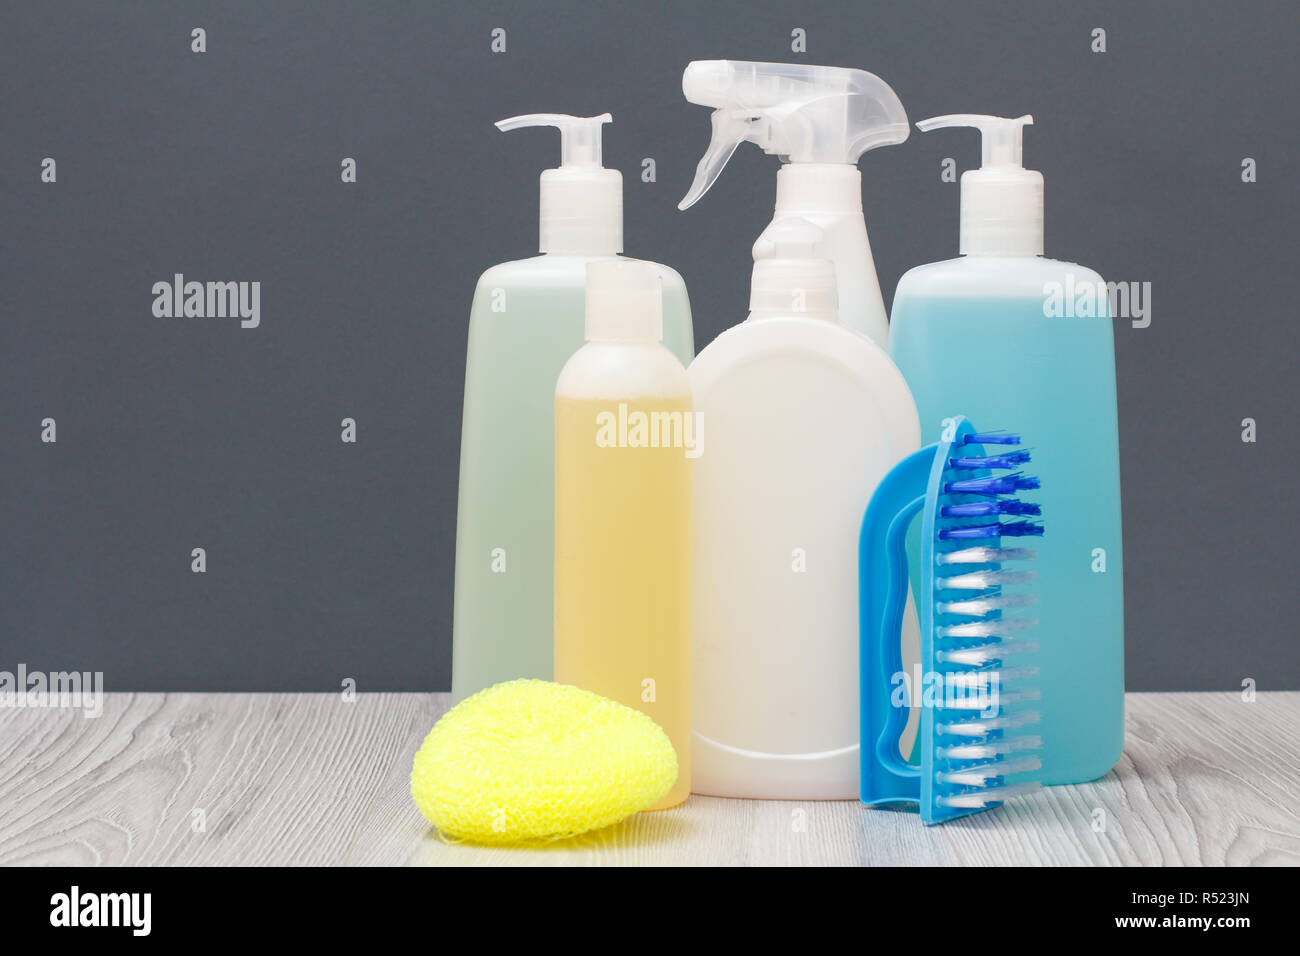 Plastic bottles of dishwashing liquid, glass and tile cleaner, detergent for microwave ovens and stoves, brushe and sponge on gray background. Stock Photo